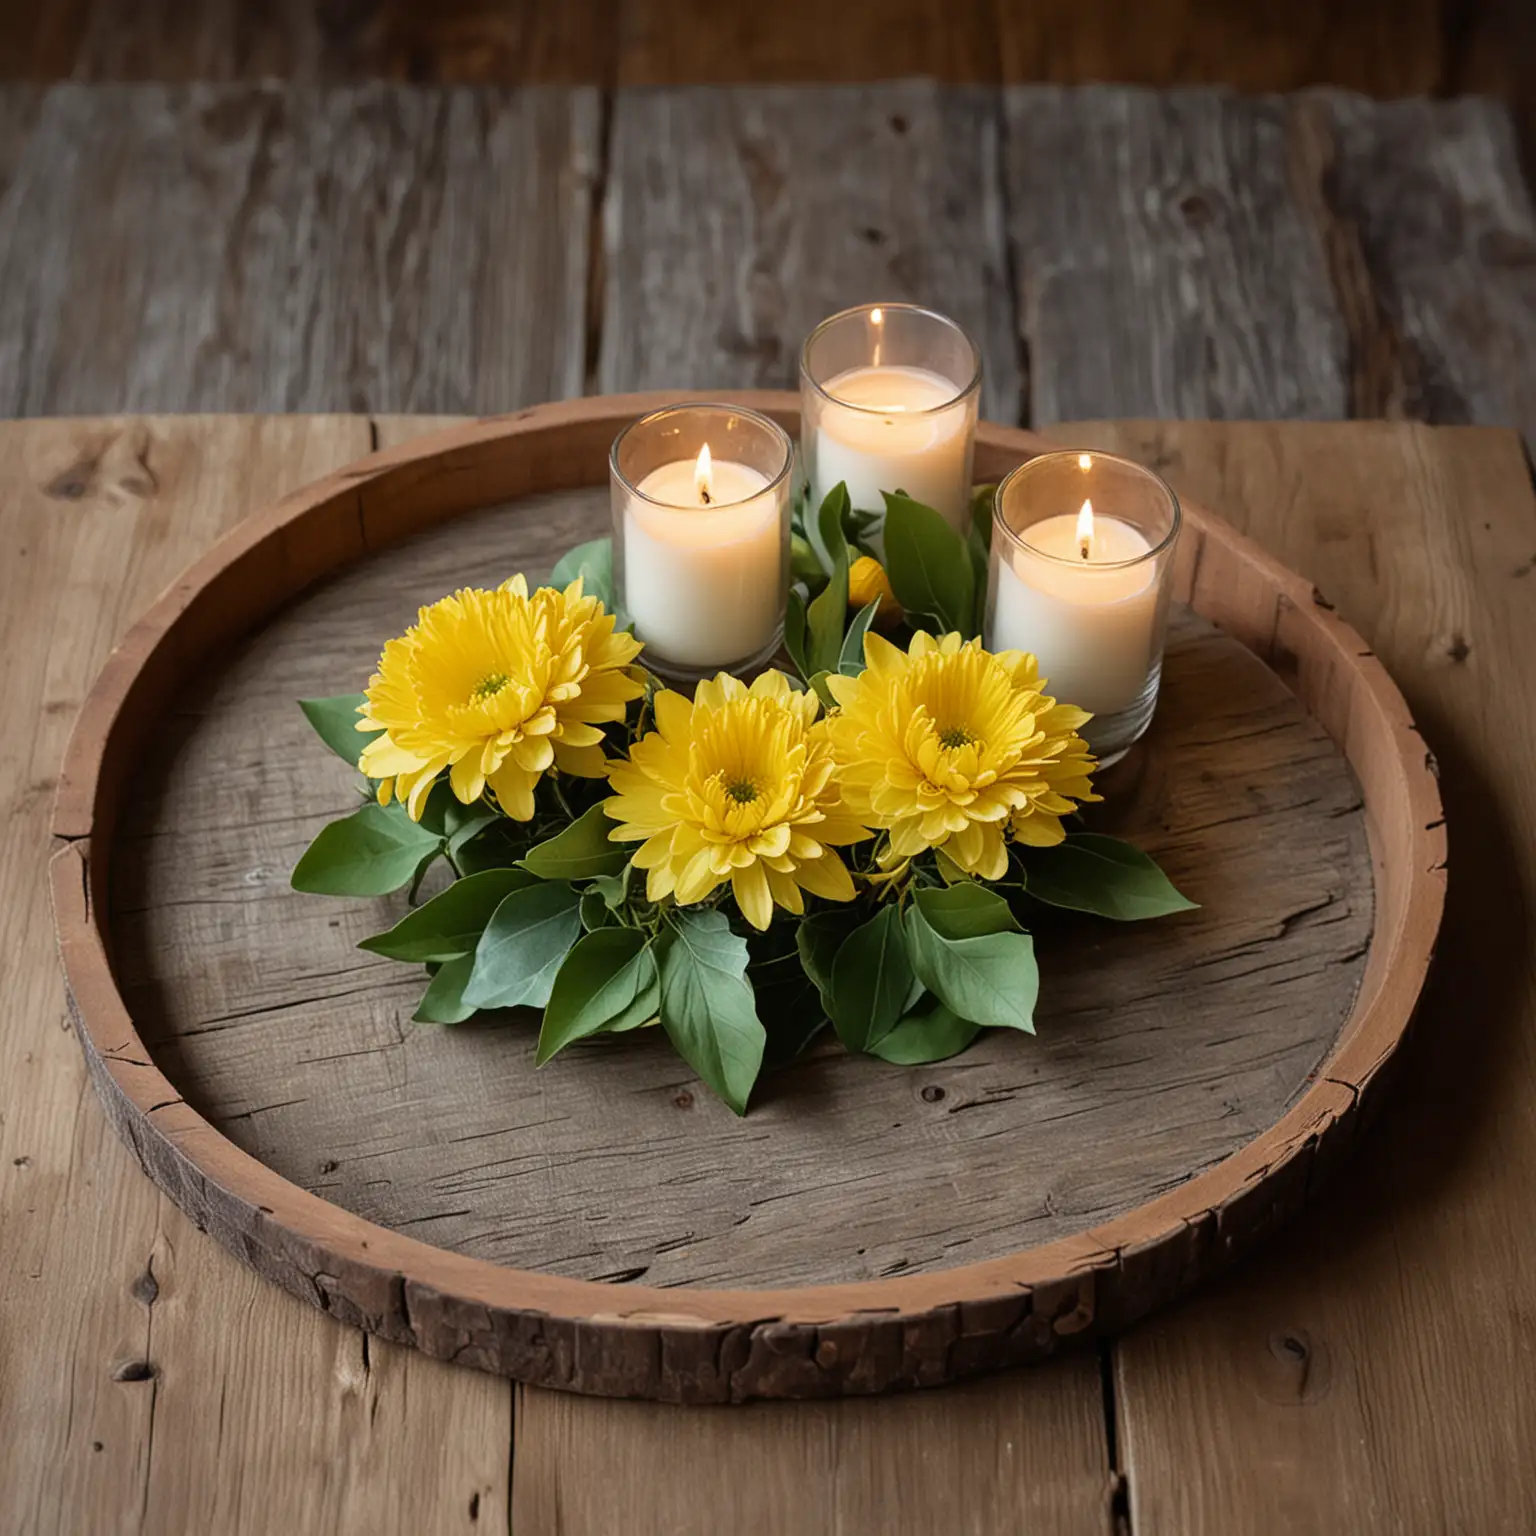 a small and simple rustic wedding centerpiece shown on a rustic wedding table, consisting of a rustic round tray holding lemons and votive candles and yellow flower blossoms